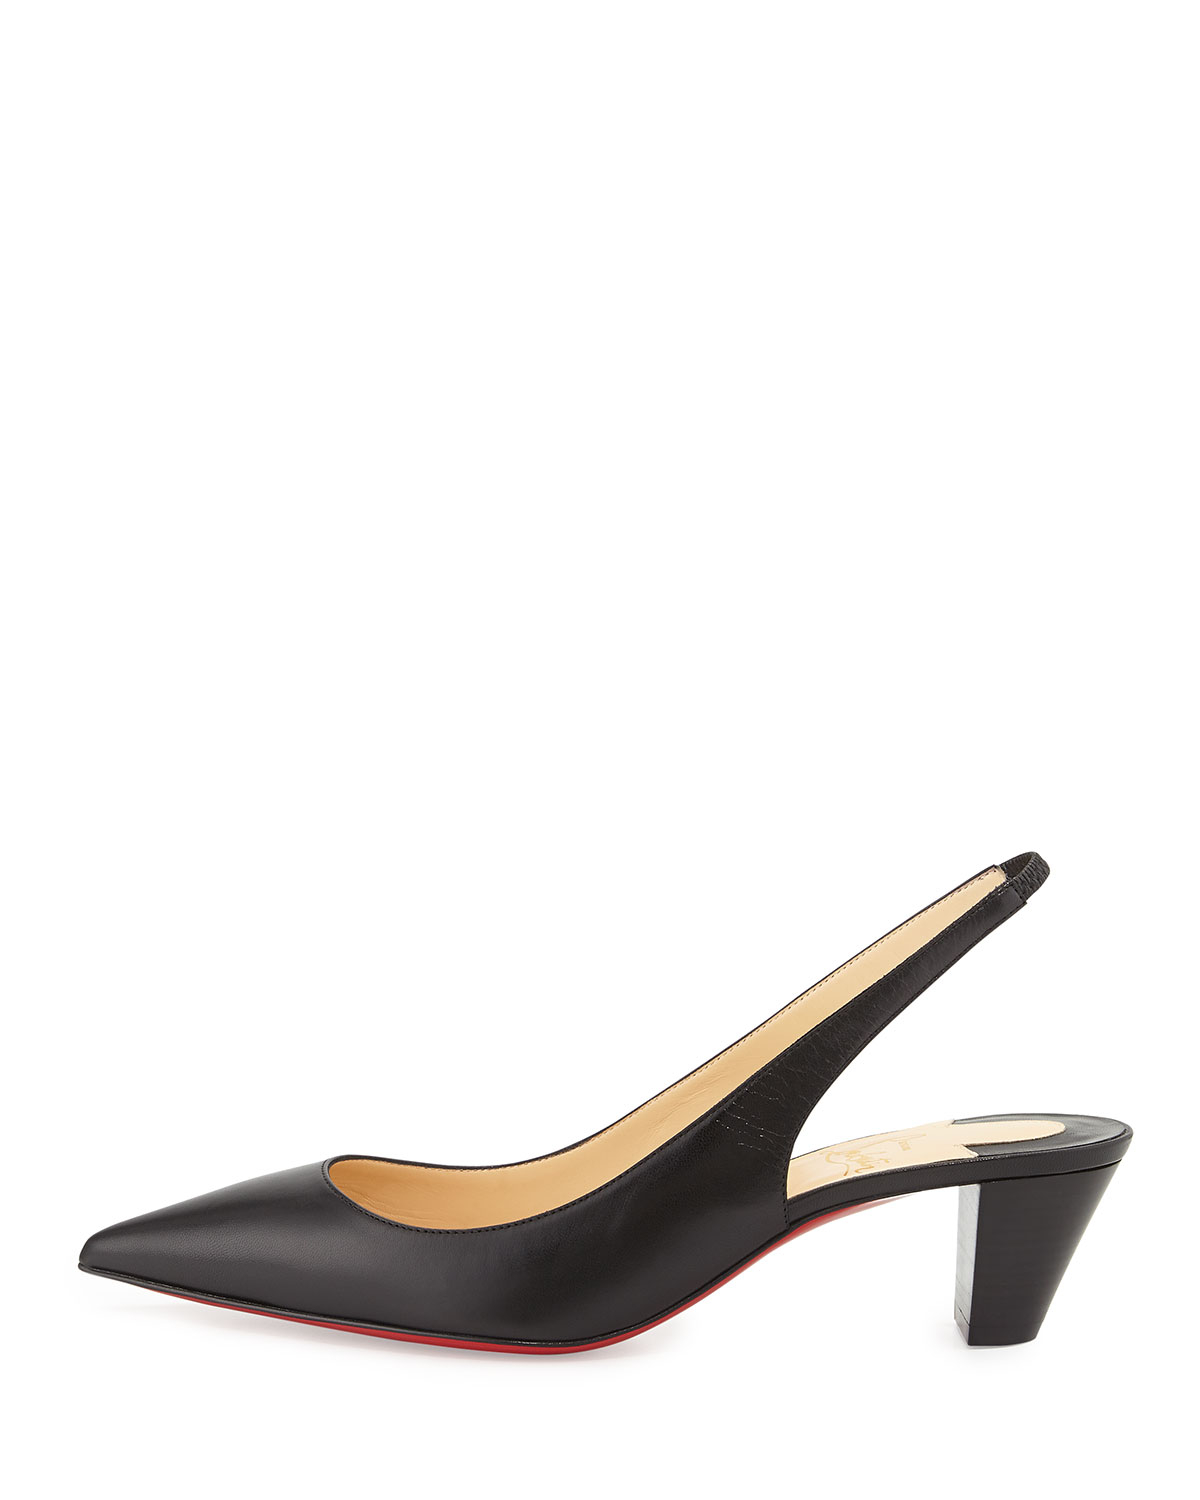 christian louis button shoes - Christian louboutin Karelli Point-Toe Low-Heel Red Sole Slingback ...